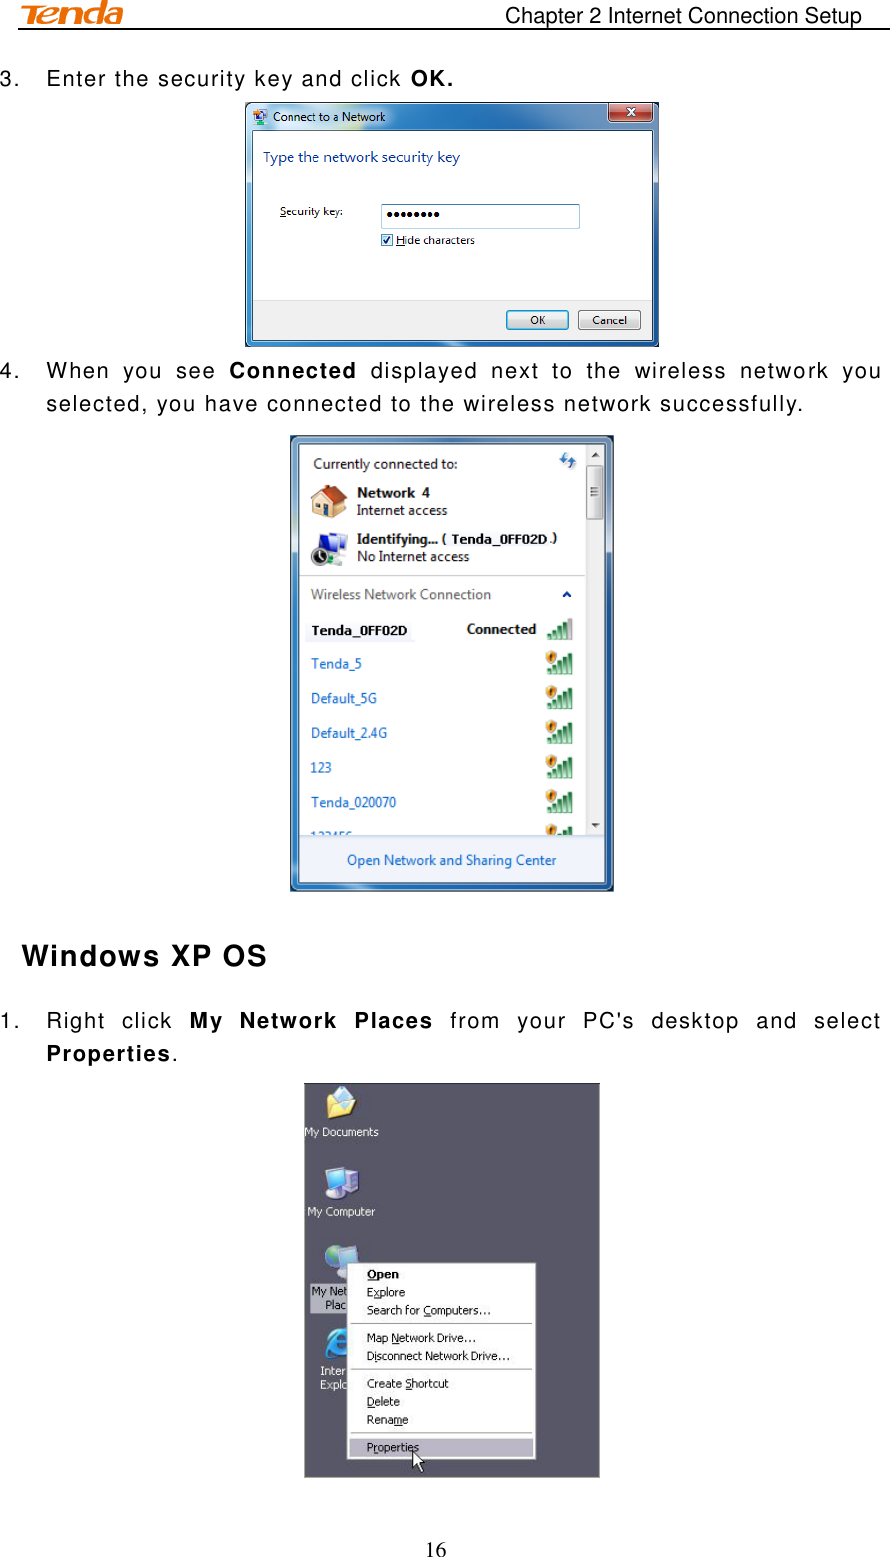                                                                       Chapter 2 Internet Connection Setup 16 3.  Enter the security key and click OK.  4.  When  you  see  Connected  displayed  next  to  the  wireless  network  you selected, you have connected to the wireless network successfully.   Windows XP OS 1.  Right  click  My  Network  Places  from  your  PC&apos;s  desktop  and  select Properties.  